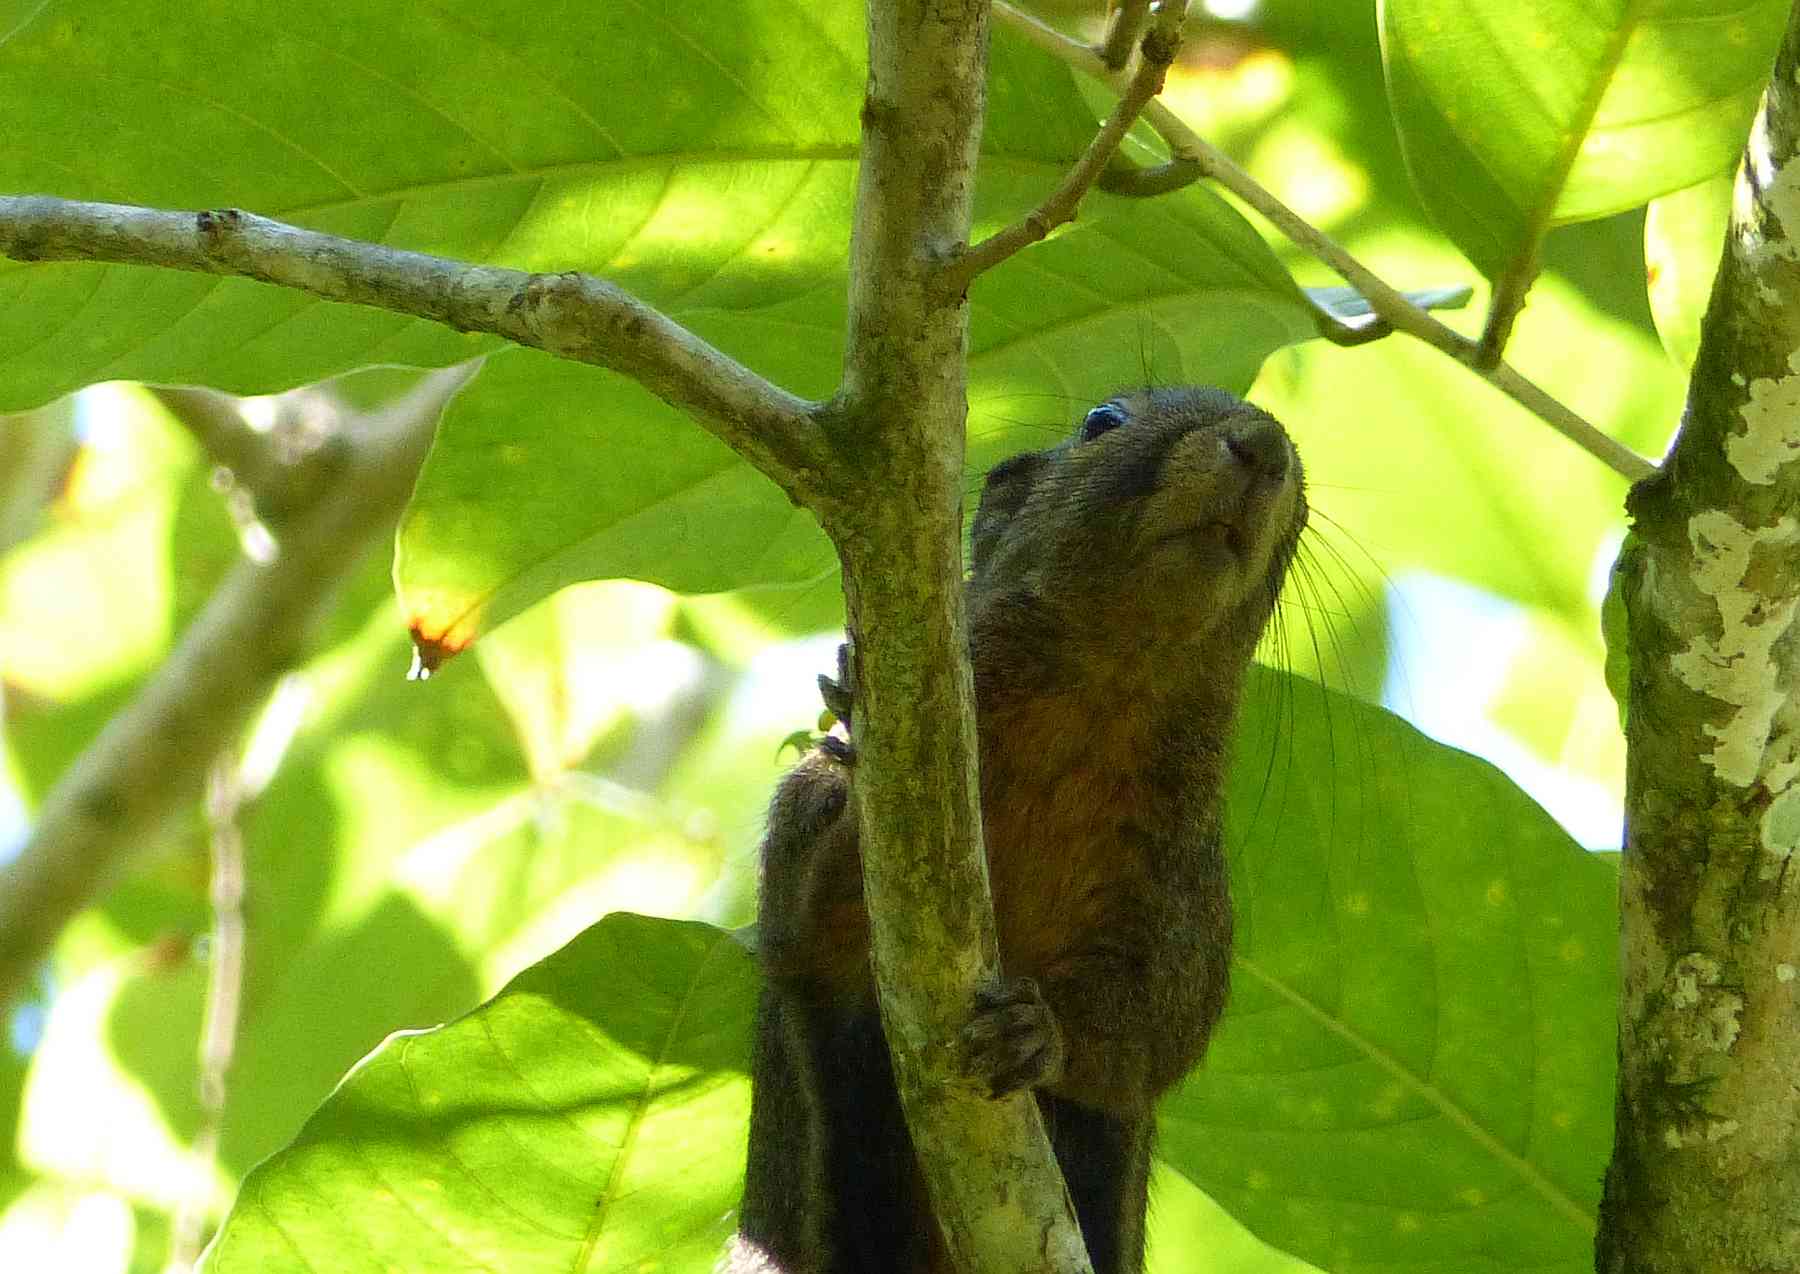 Plantain Squirrel in Bako National Park, home of the Colugo